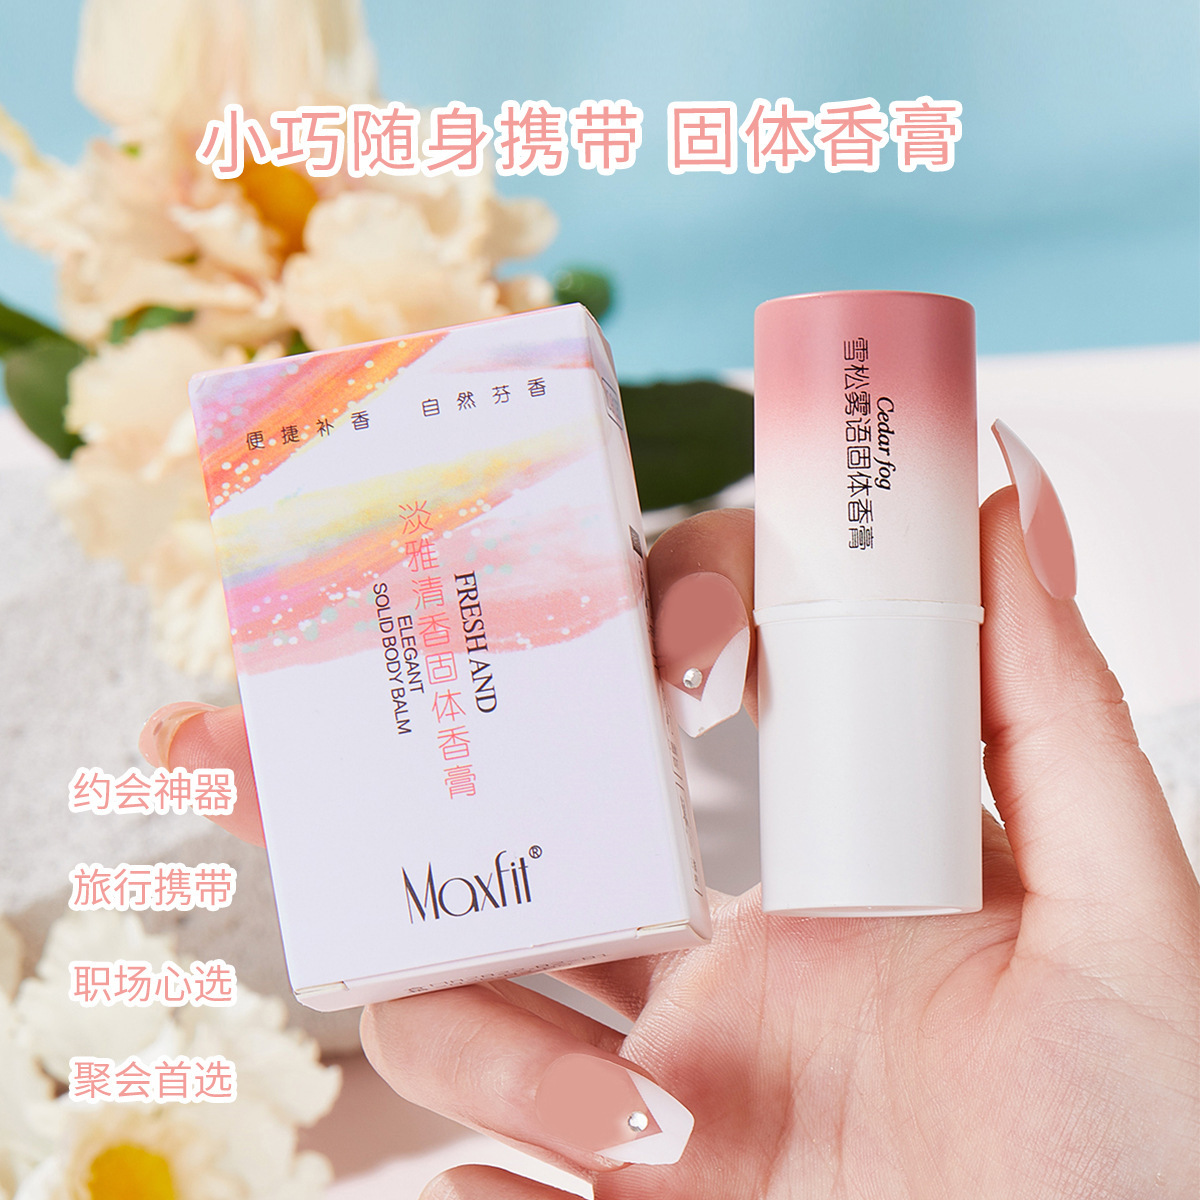 solid Ointment Lasting Fragrance A small minority Solid-state Perfume portable Deodorants factory wholesale On behalf of